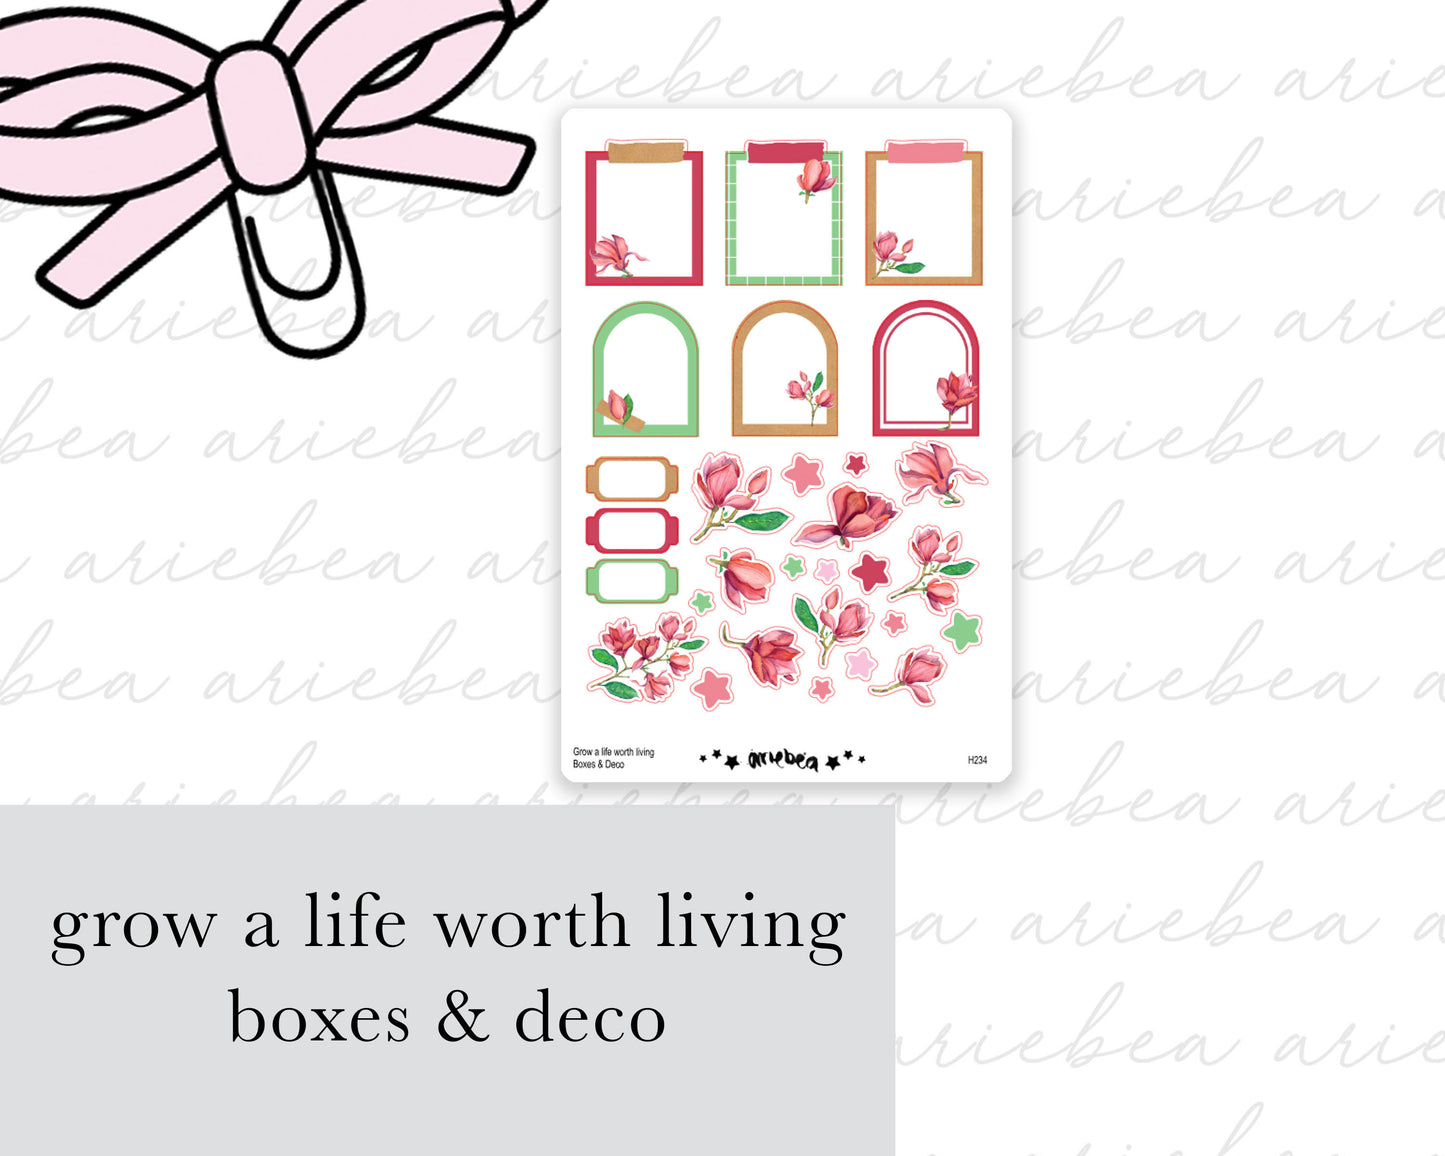 Grow a life worth living Boxes & Deco